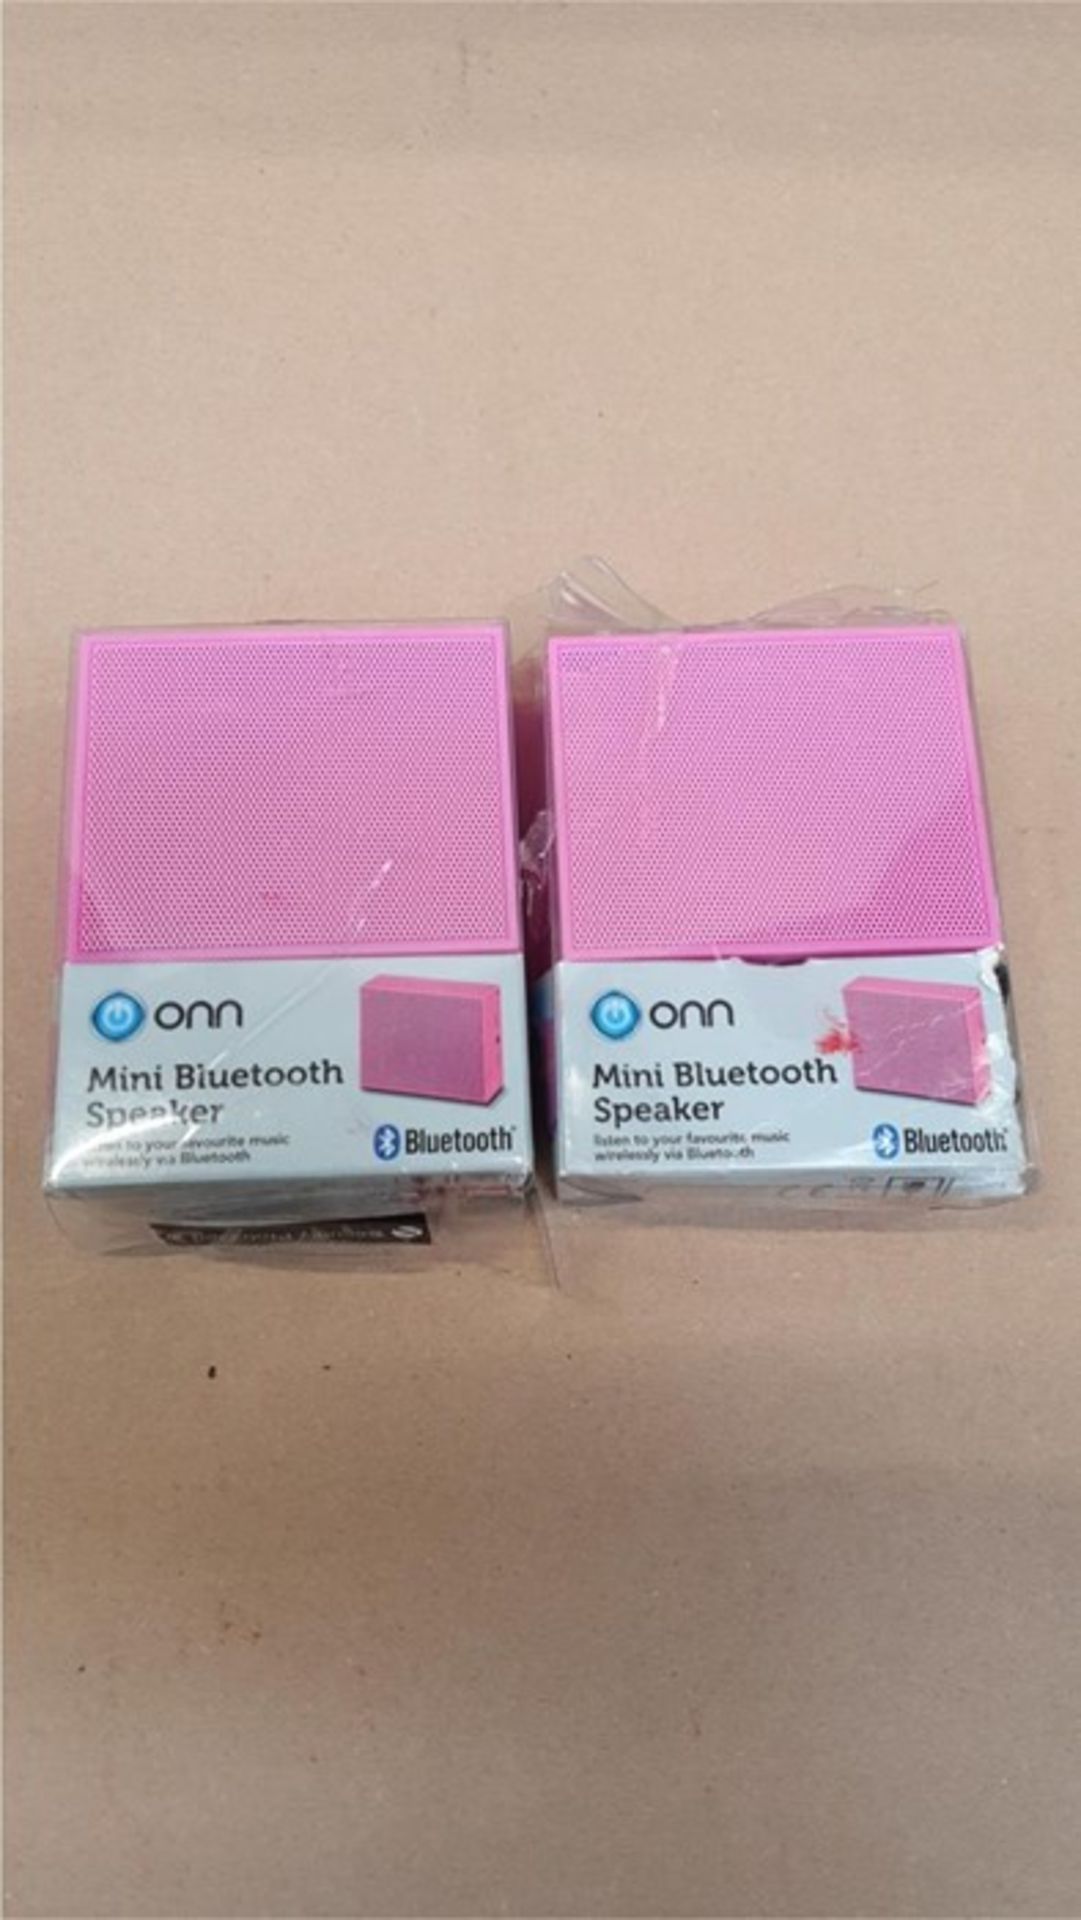 1 LOT TO CONTAIN 2 PINK ONN PORTABLE MINI BLUETOOTH SPEAKERS / BL - 5162 / RRP £20.00 (VIEWING